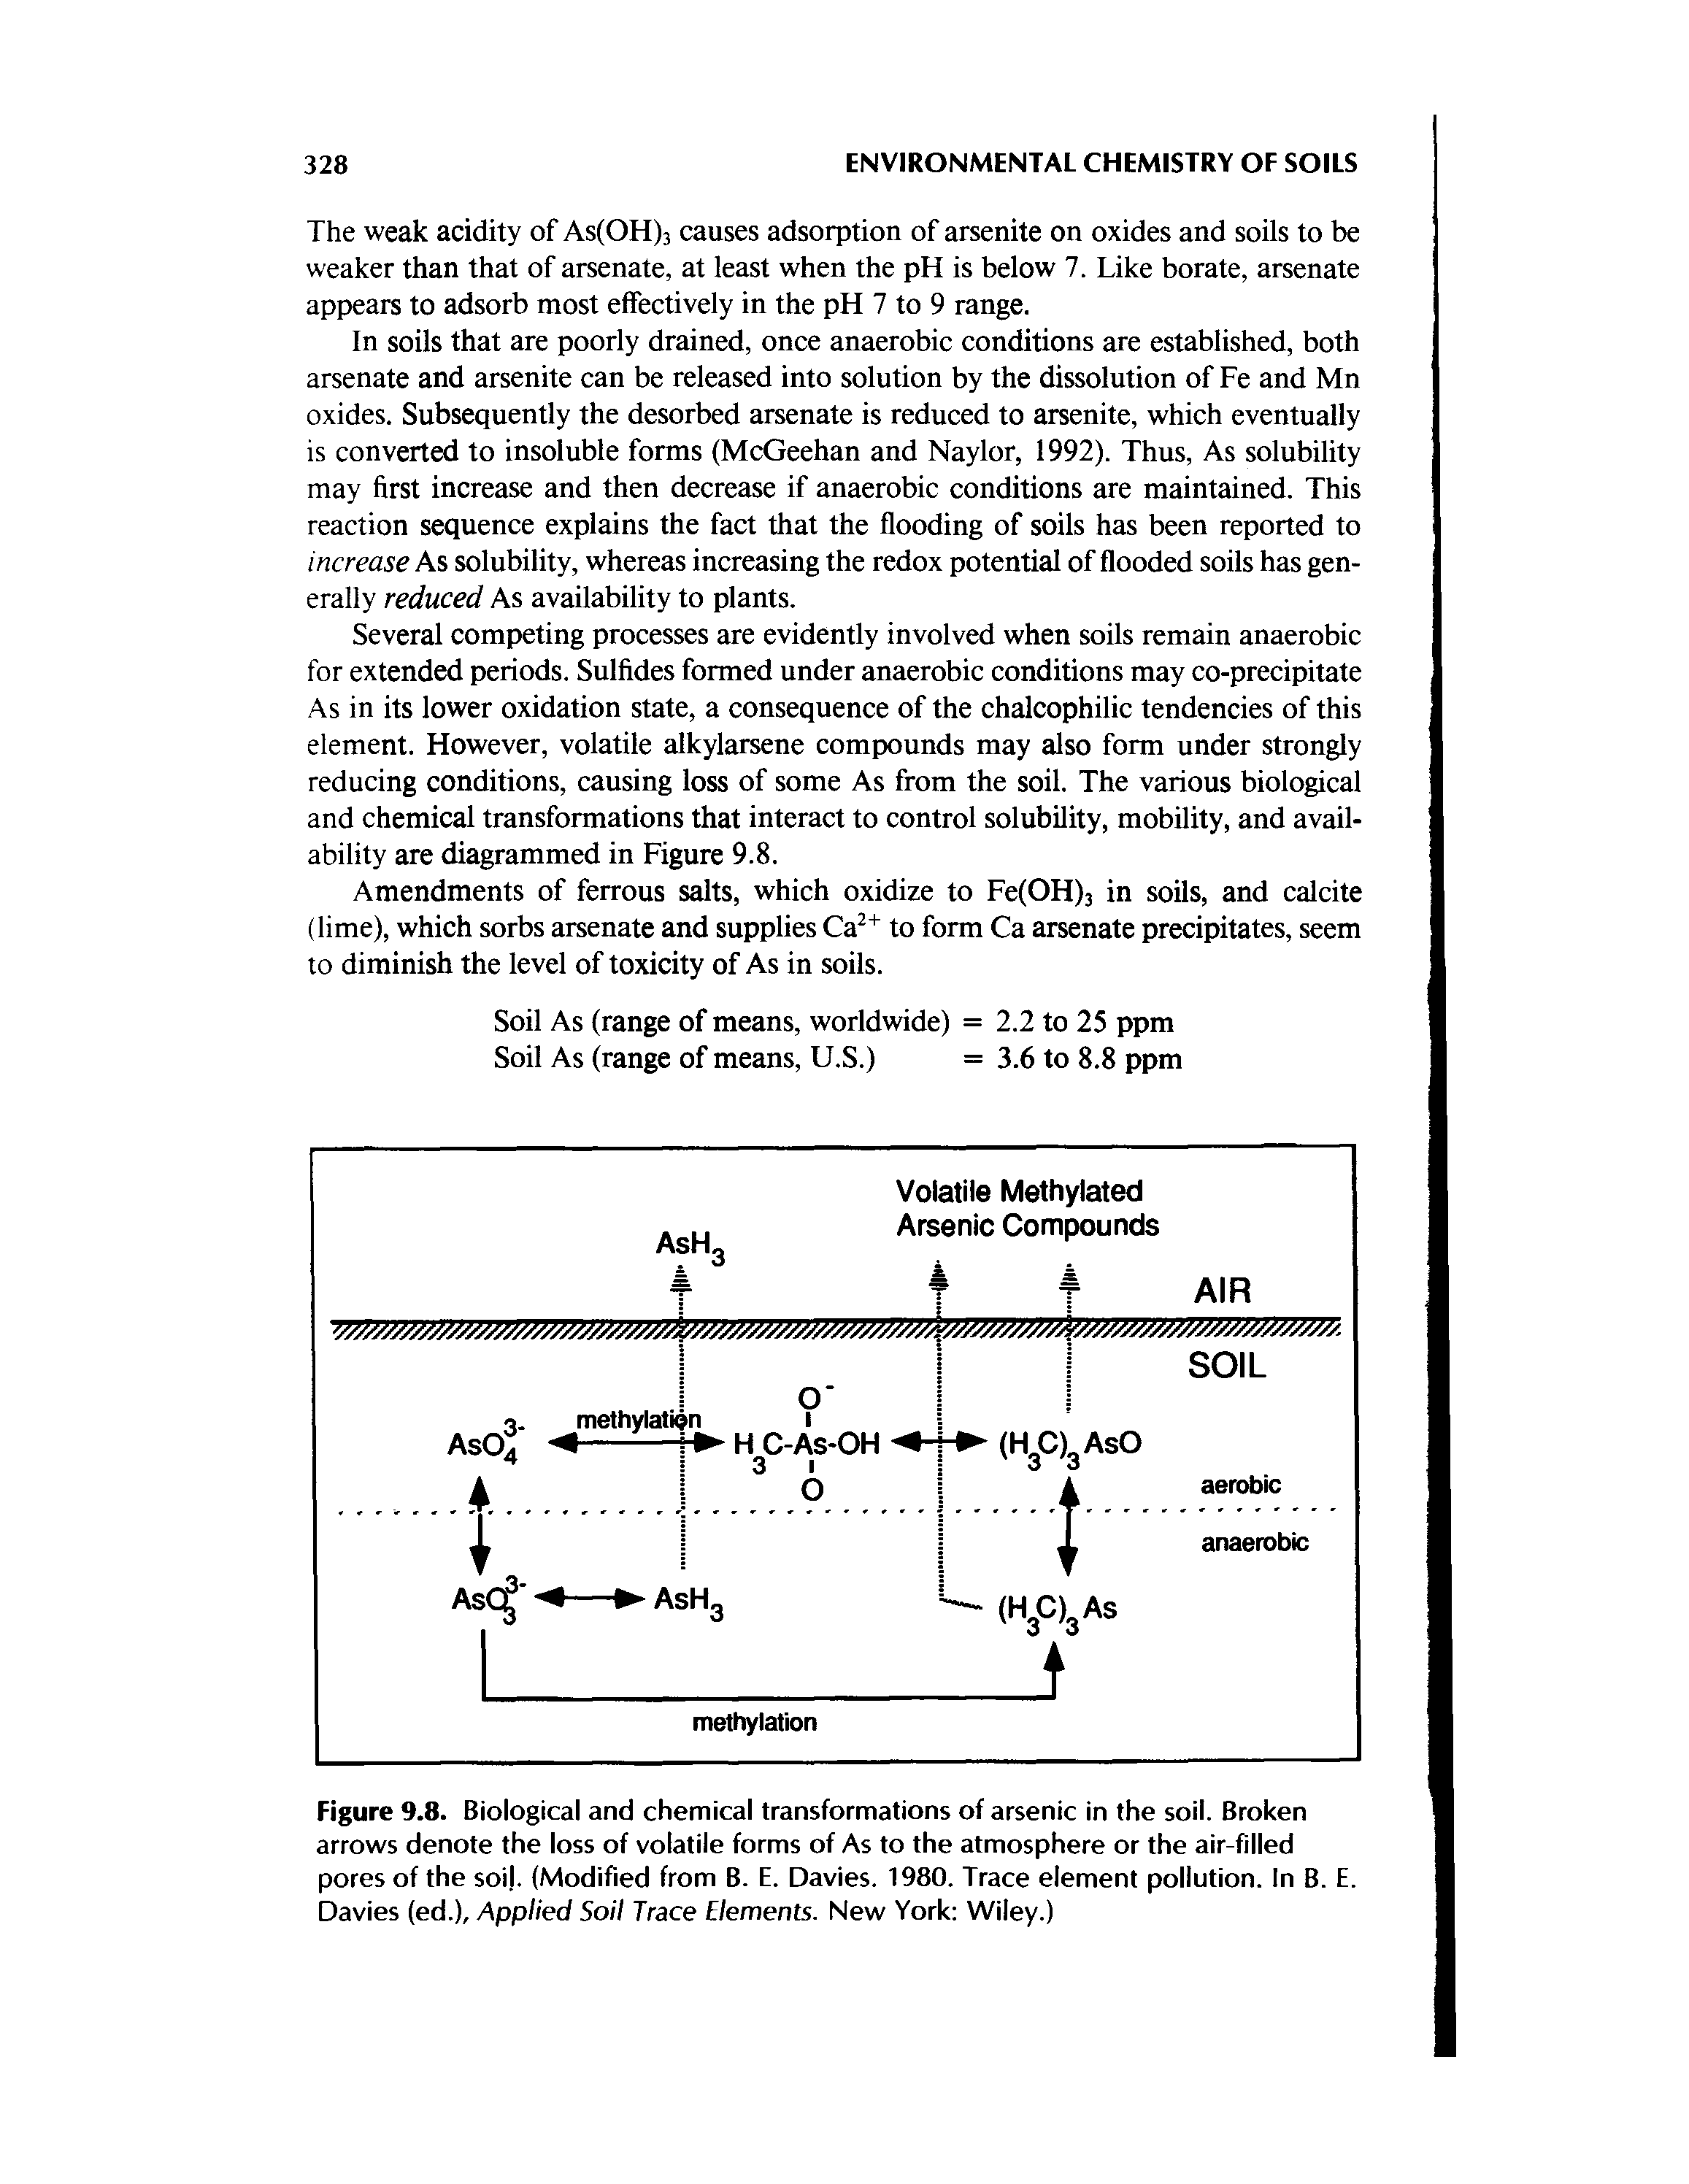 Figure 9.8. Biological and chemical transformations of arsenic in the soil. Broken arrows denote the loss of volatile forms of As to the atmosphere or the air-filled pores of the soi. (Modified from B. E. Davies. 1980. Trace element pollution. In B. E. Davies (ed.). Applied Soil Trace Elements. New York Wiley.)...